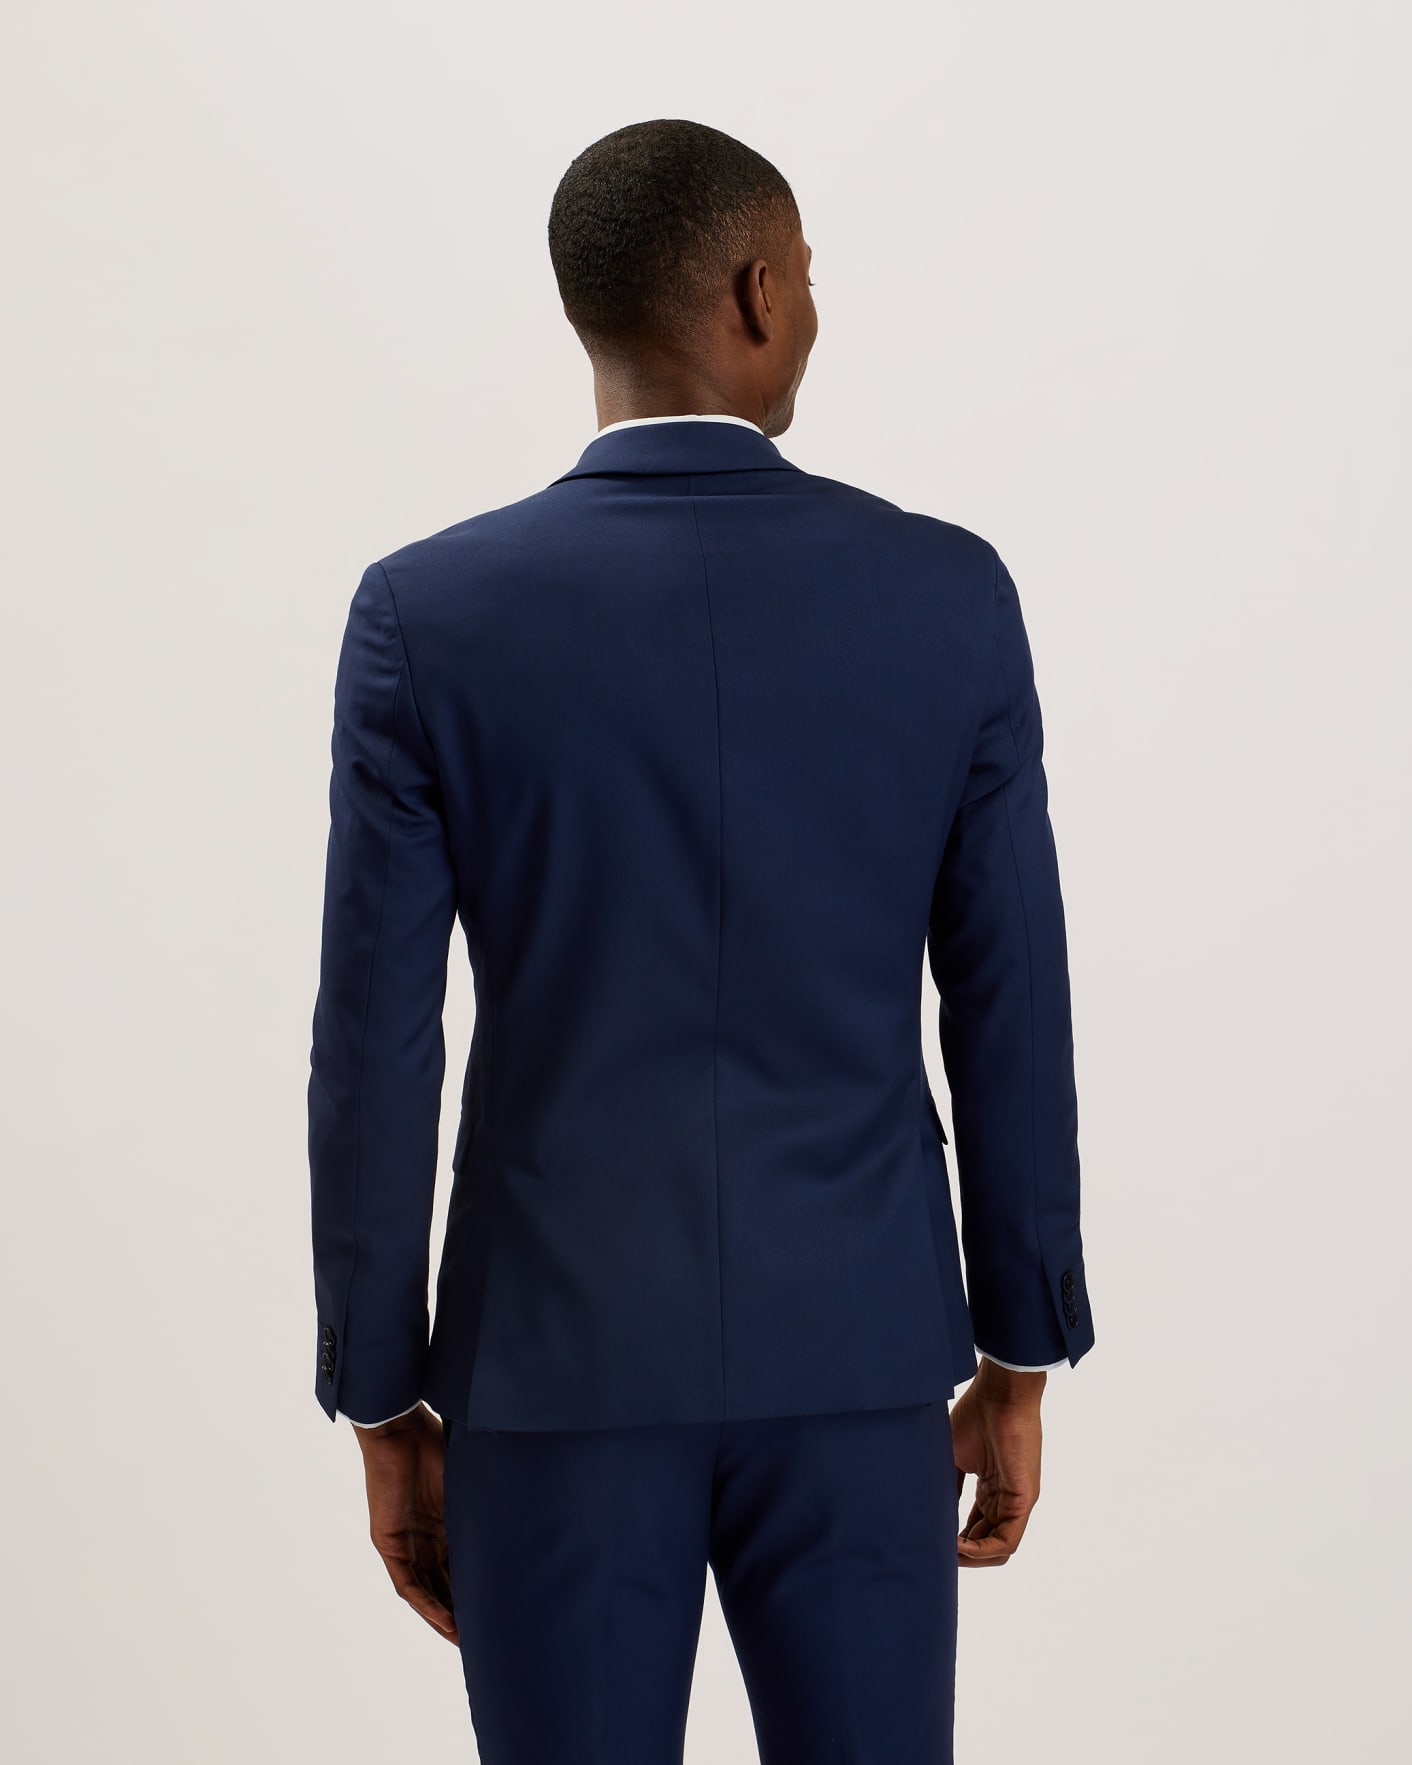 Navy Skinny Navy Twill Suit Jacket Ted Baker